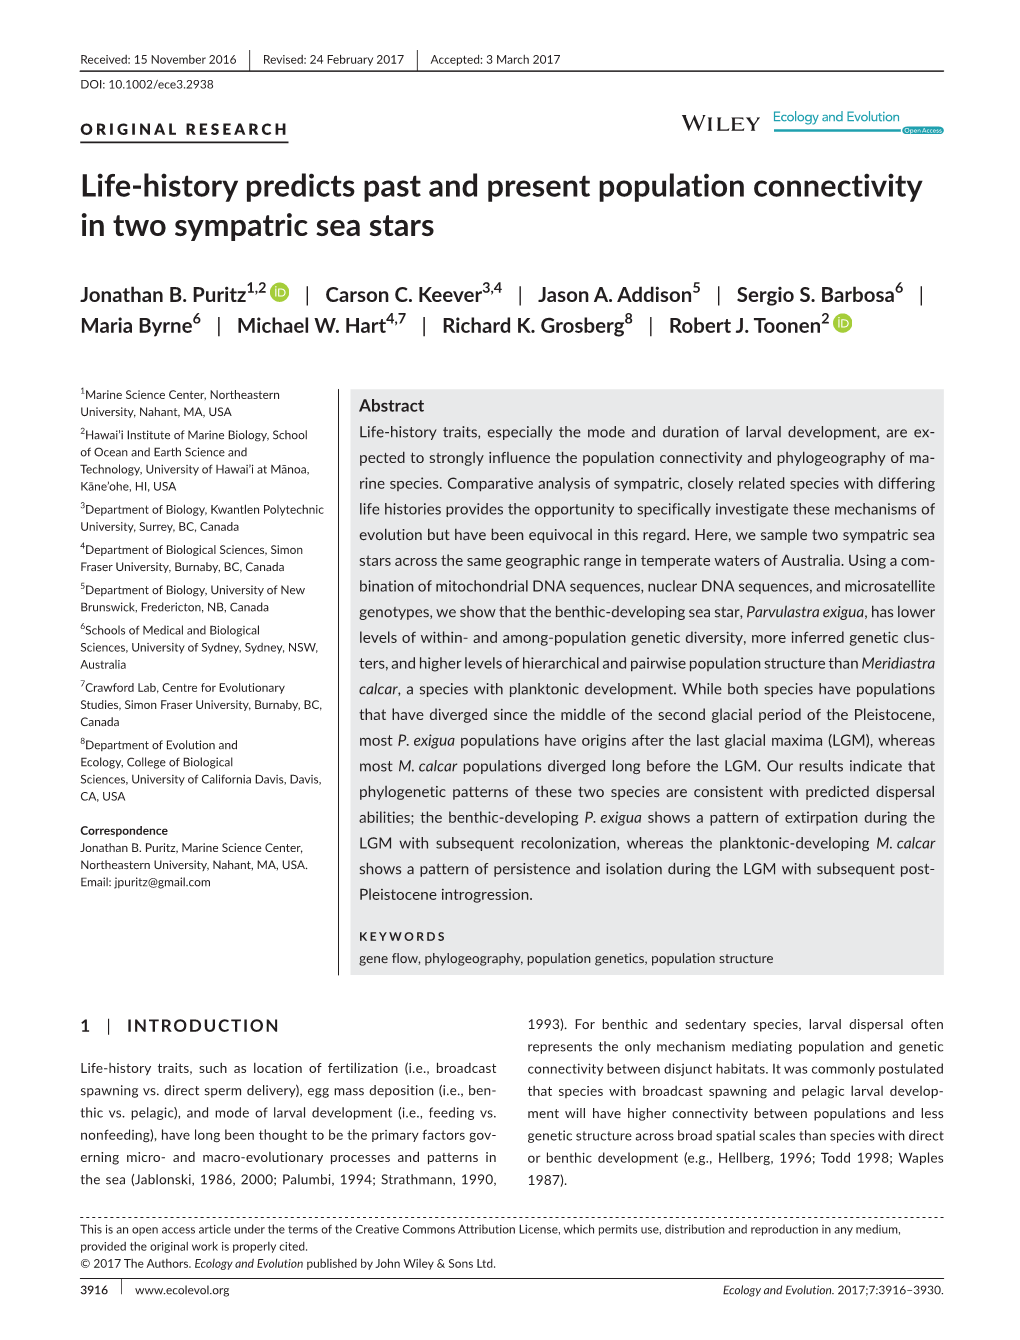 History Predicts Past and Present Population Connectivity in Two Sympatric Sea Stars